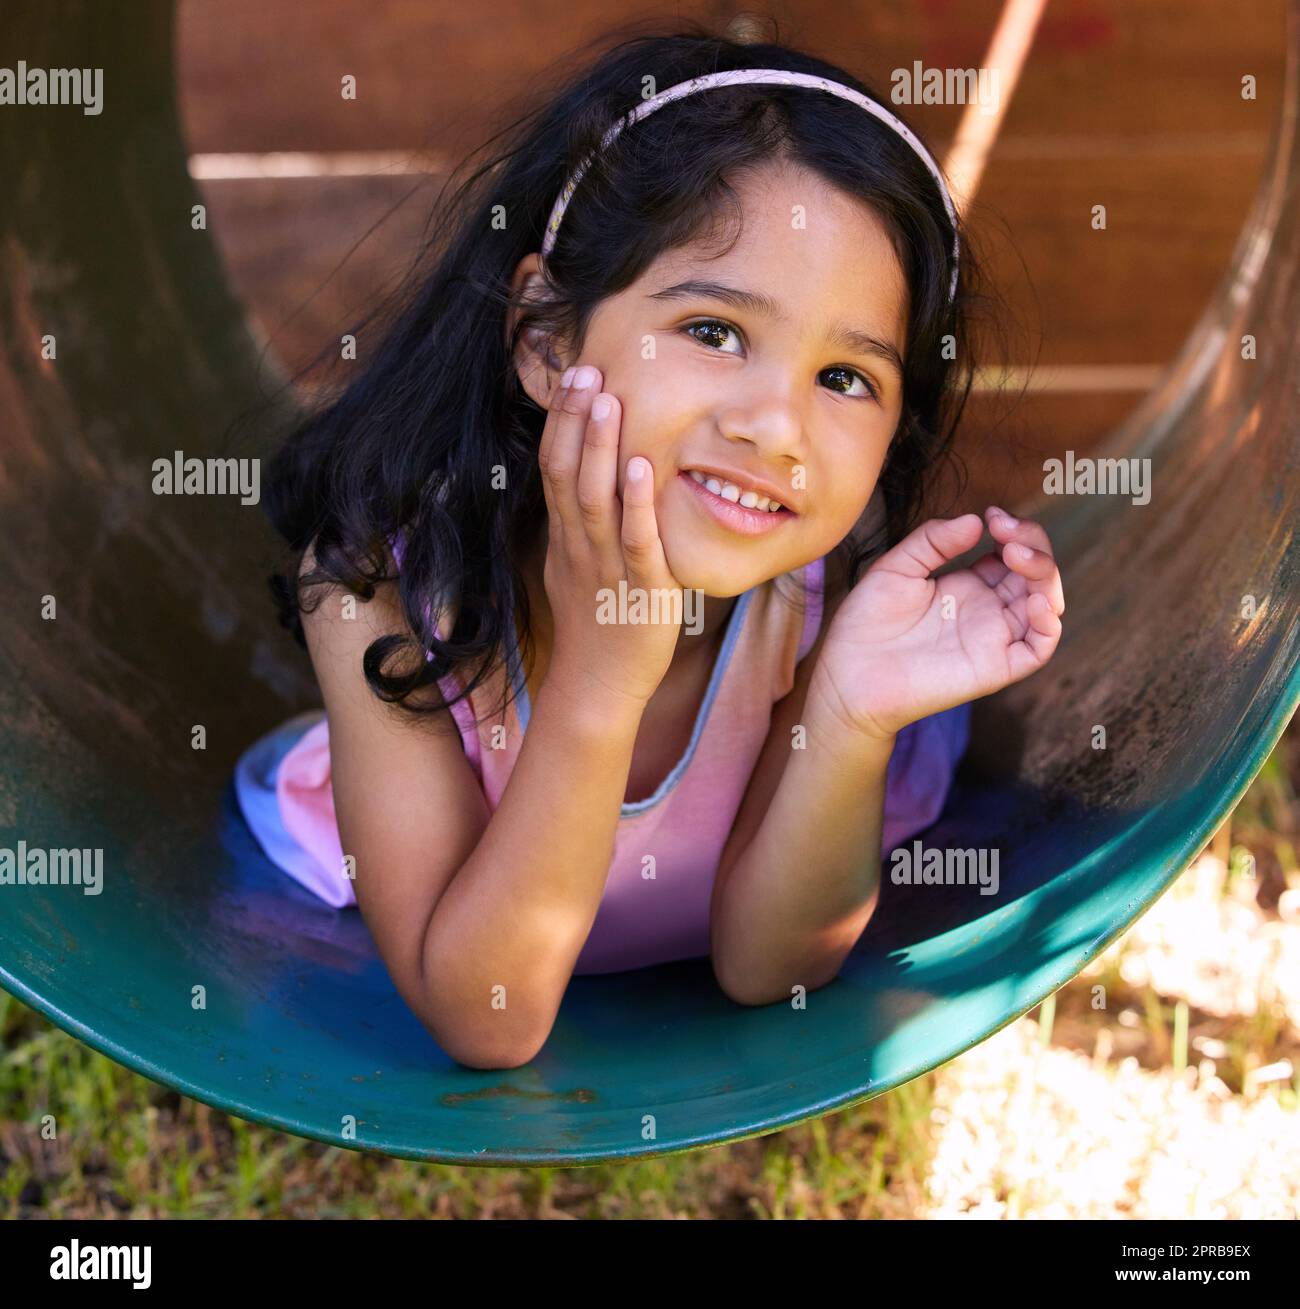 Im here to make you smile. an adorable little girl spending time outside. Stock Photo